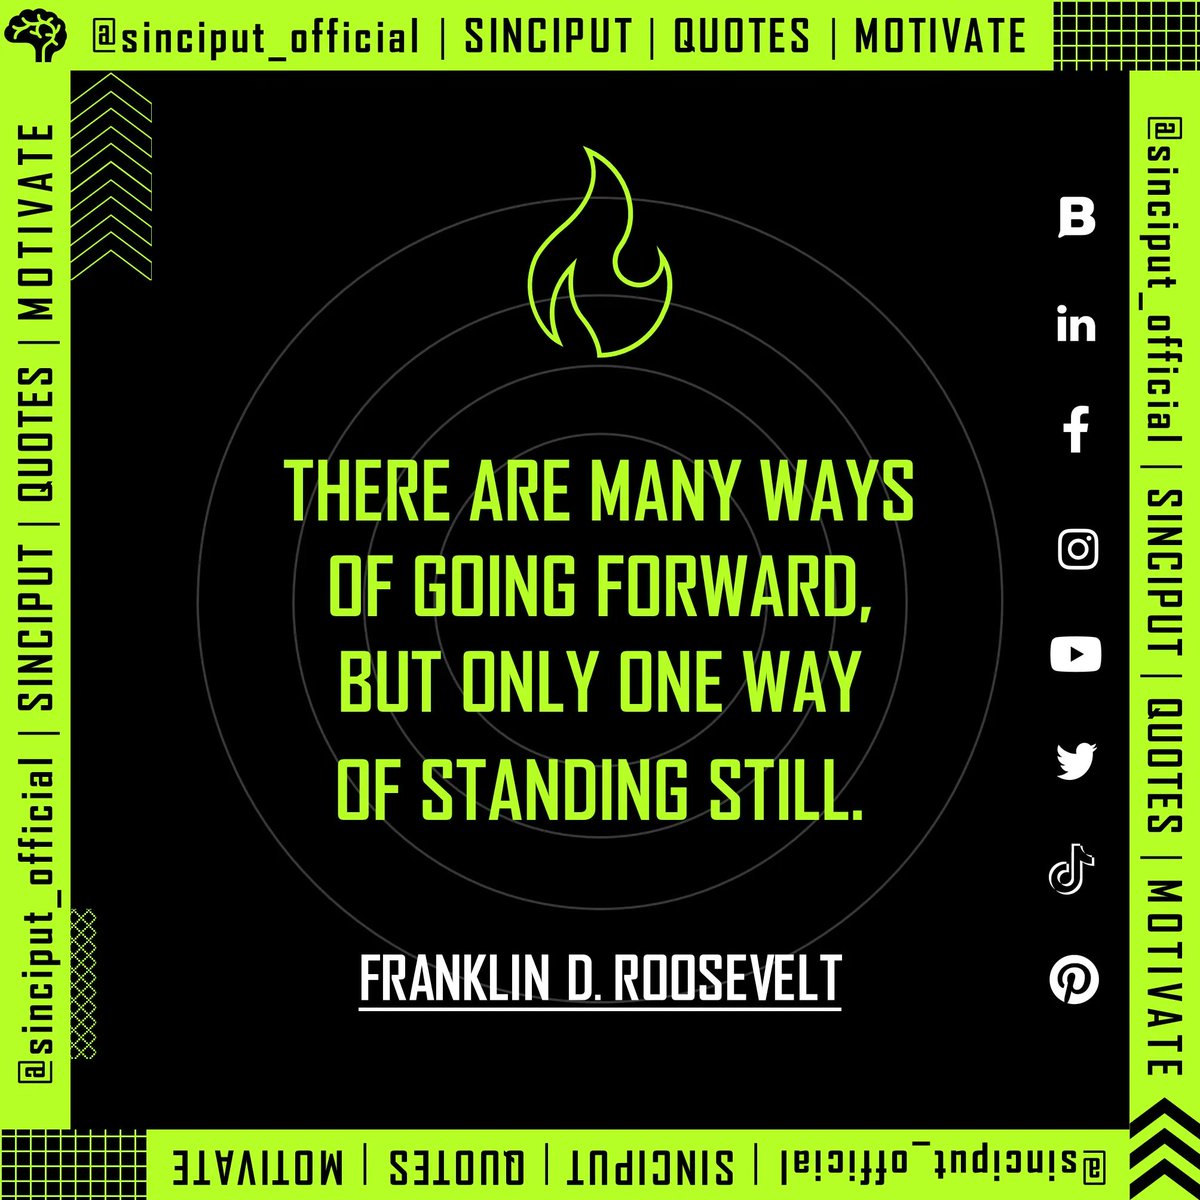 There are many ways of going forward, but only one way of standing still. | MOTIV8 | QUOTES

#sinciput #quote #lifequote #motivation #courage #confidence #power #perseverance #enthusiasm #inspiration #leadership #willpower #philosophy #book #franklinroosevelt #คำคม